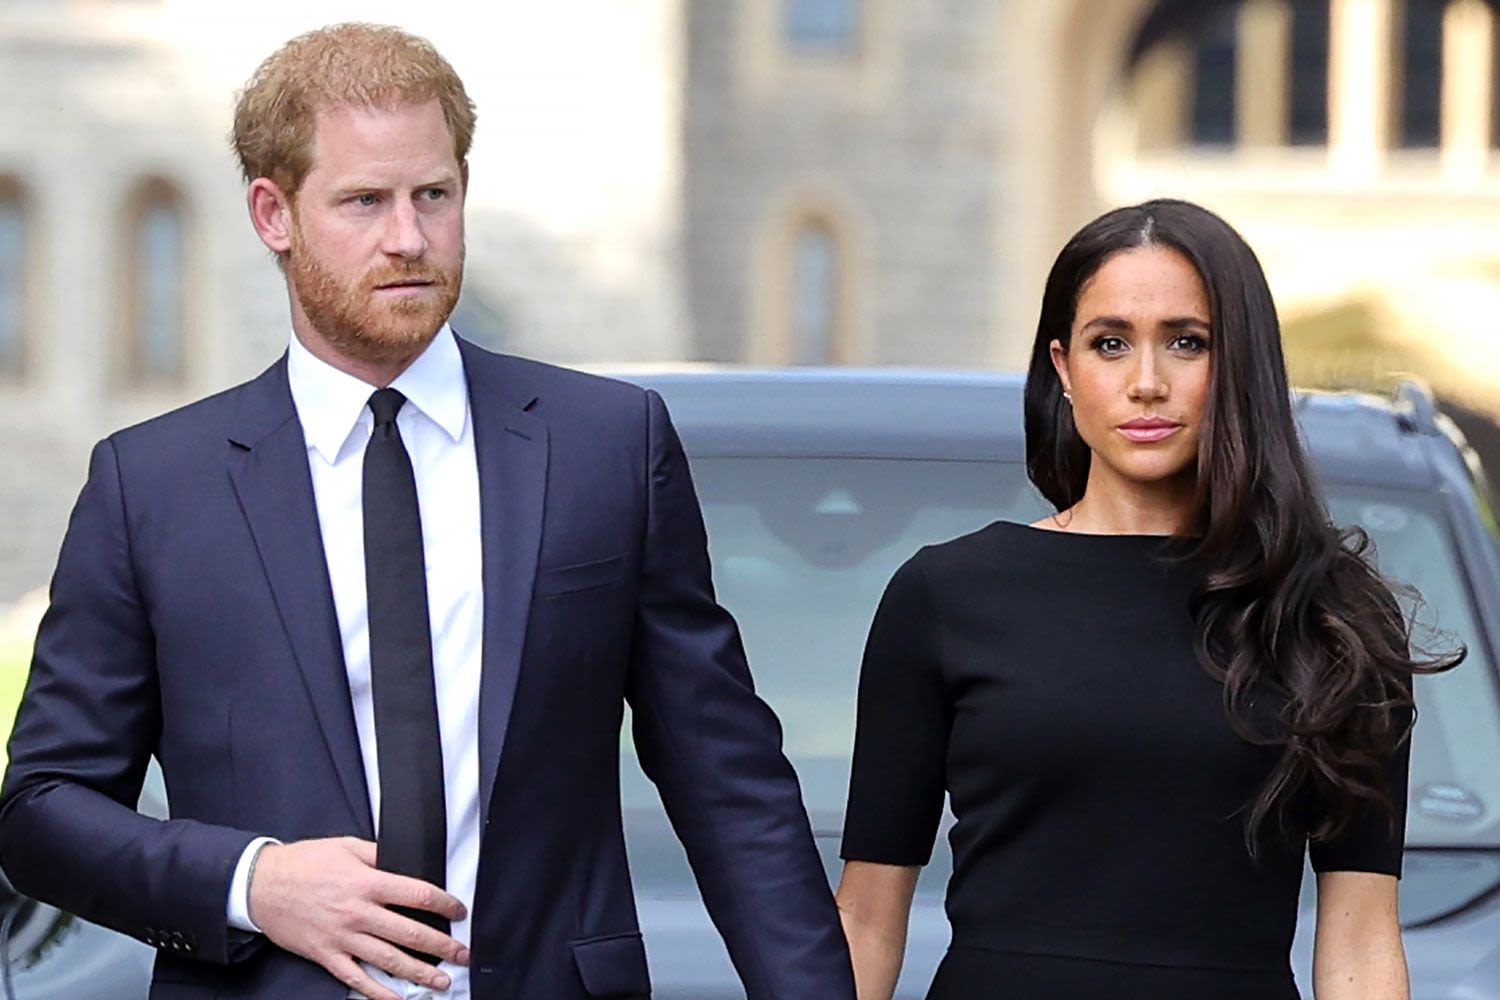 Prince Harry and Meghan Markle's Archewell Foundation Refutes 'Delinquent' Allegation, 'Remains in Good Standing'